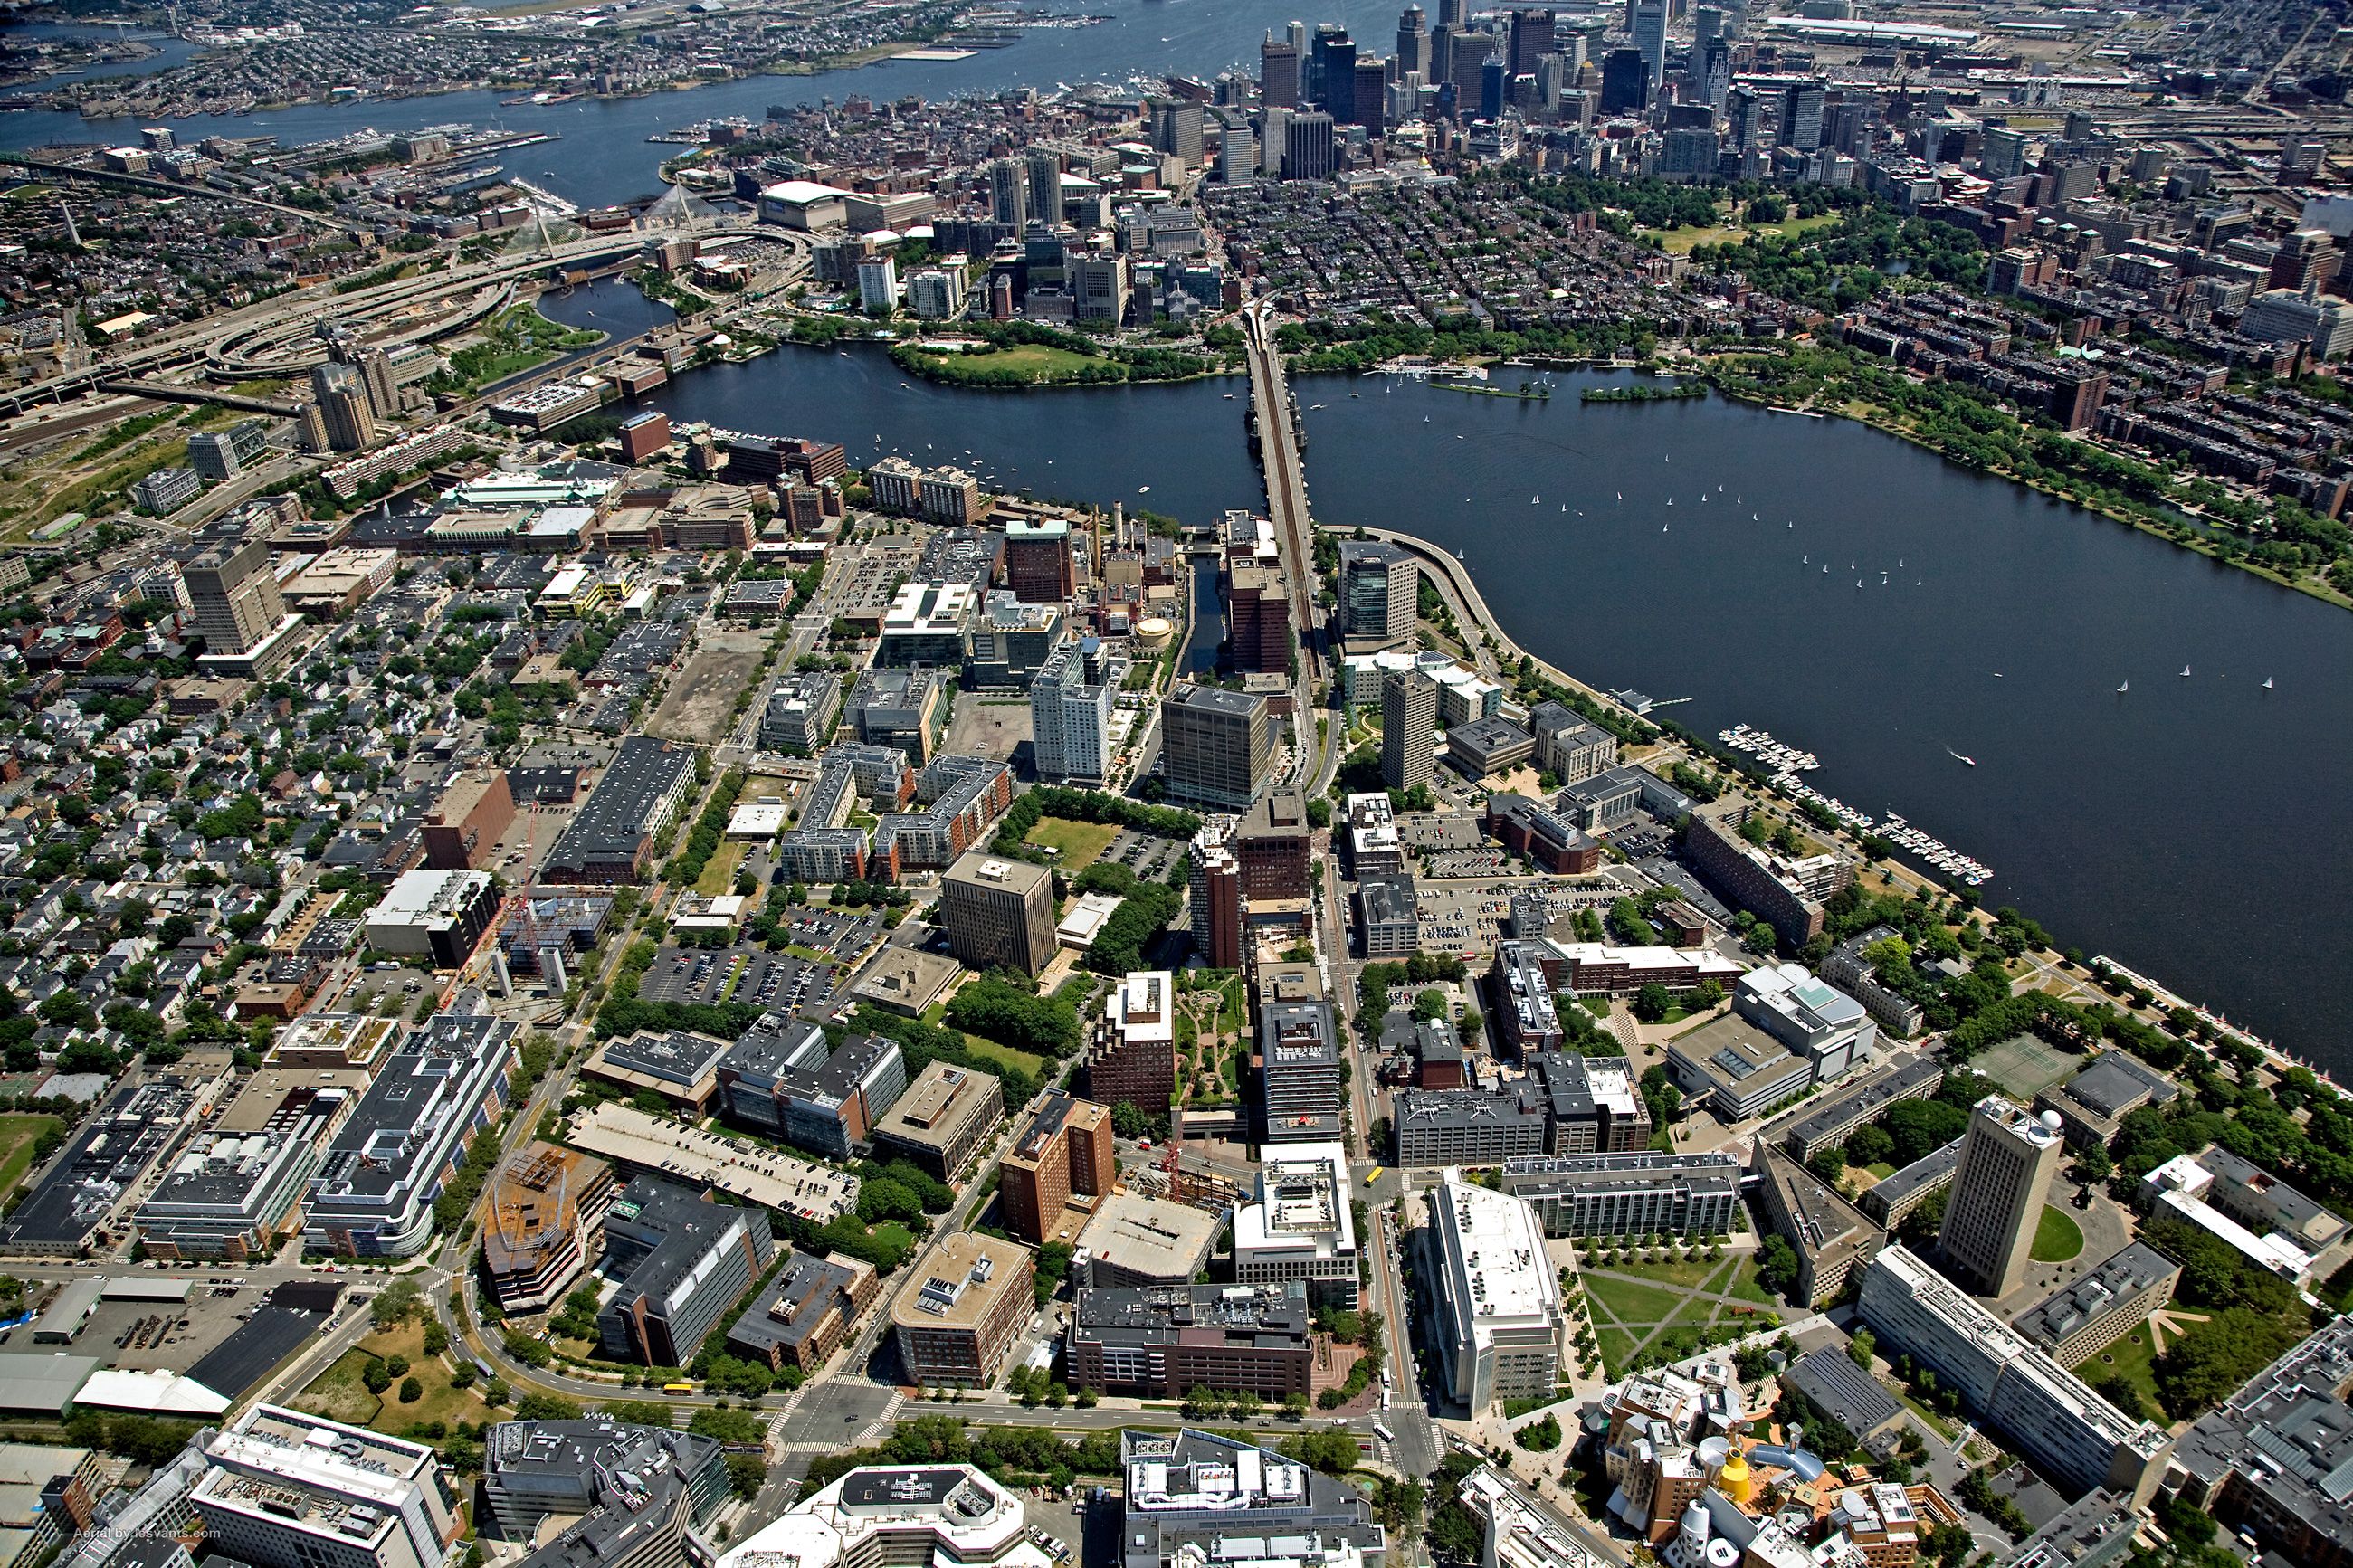 MIT Welcome Center opens in Kendall Square